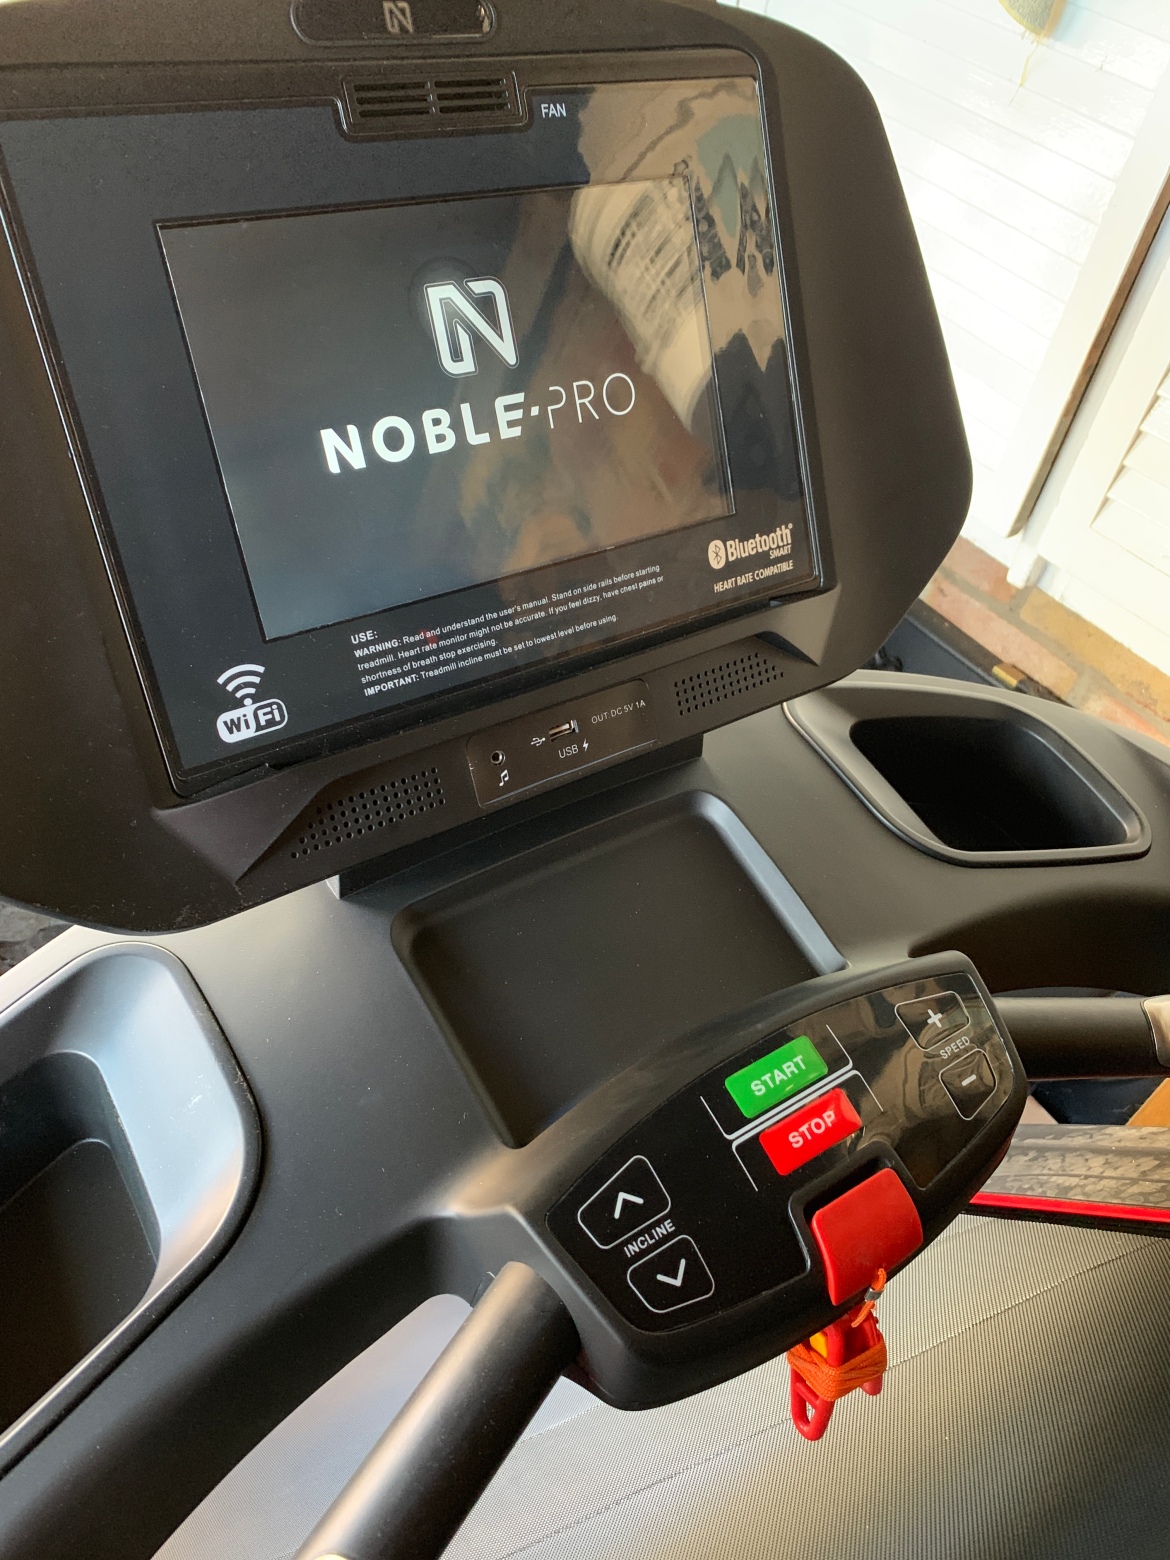 Image result for noble-pro treadmill